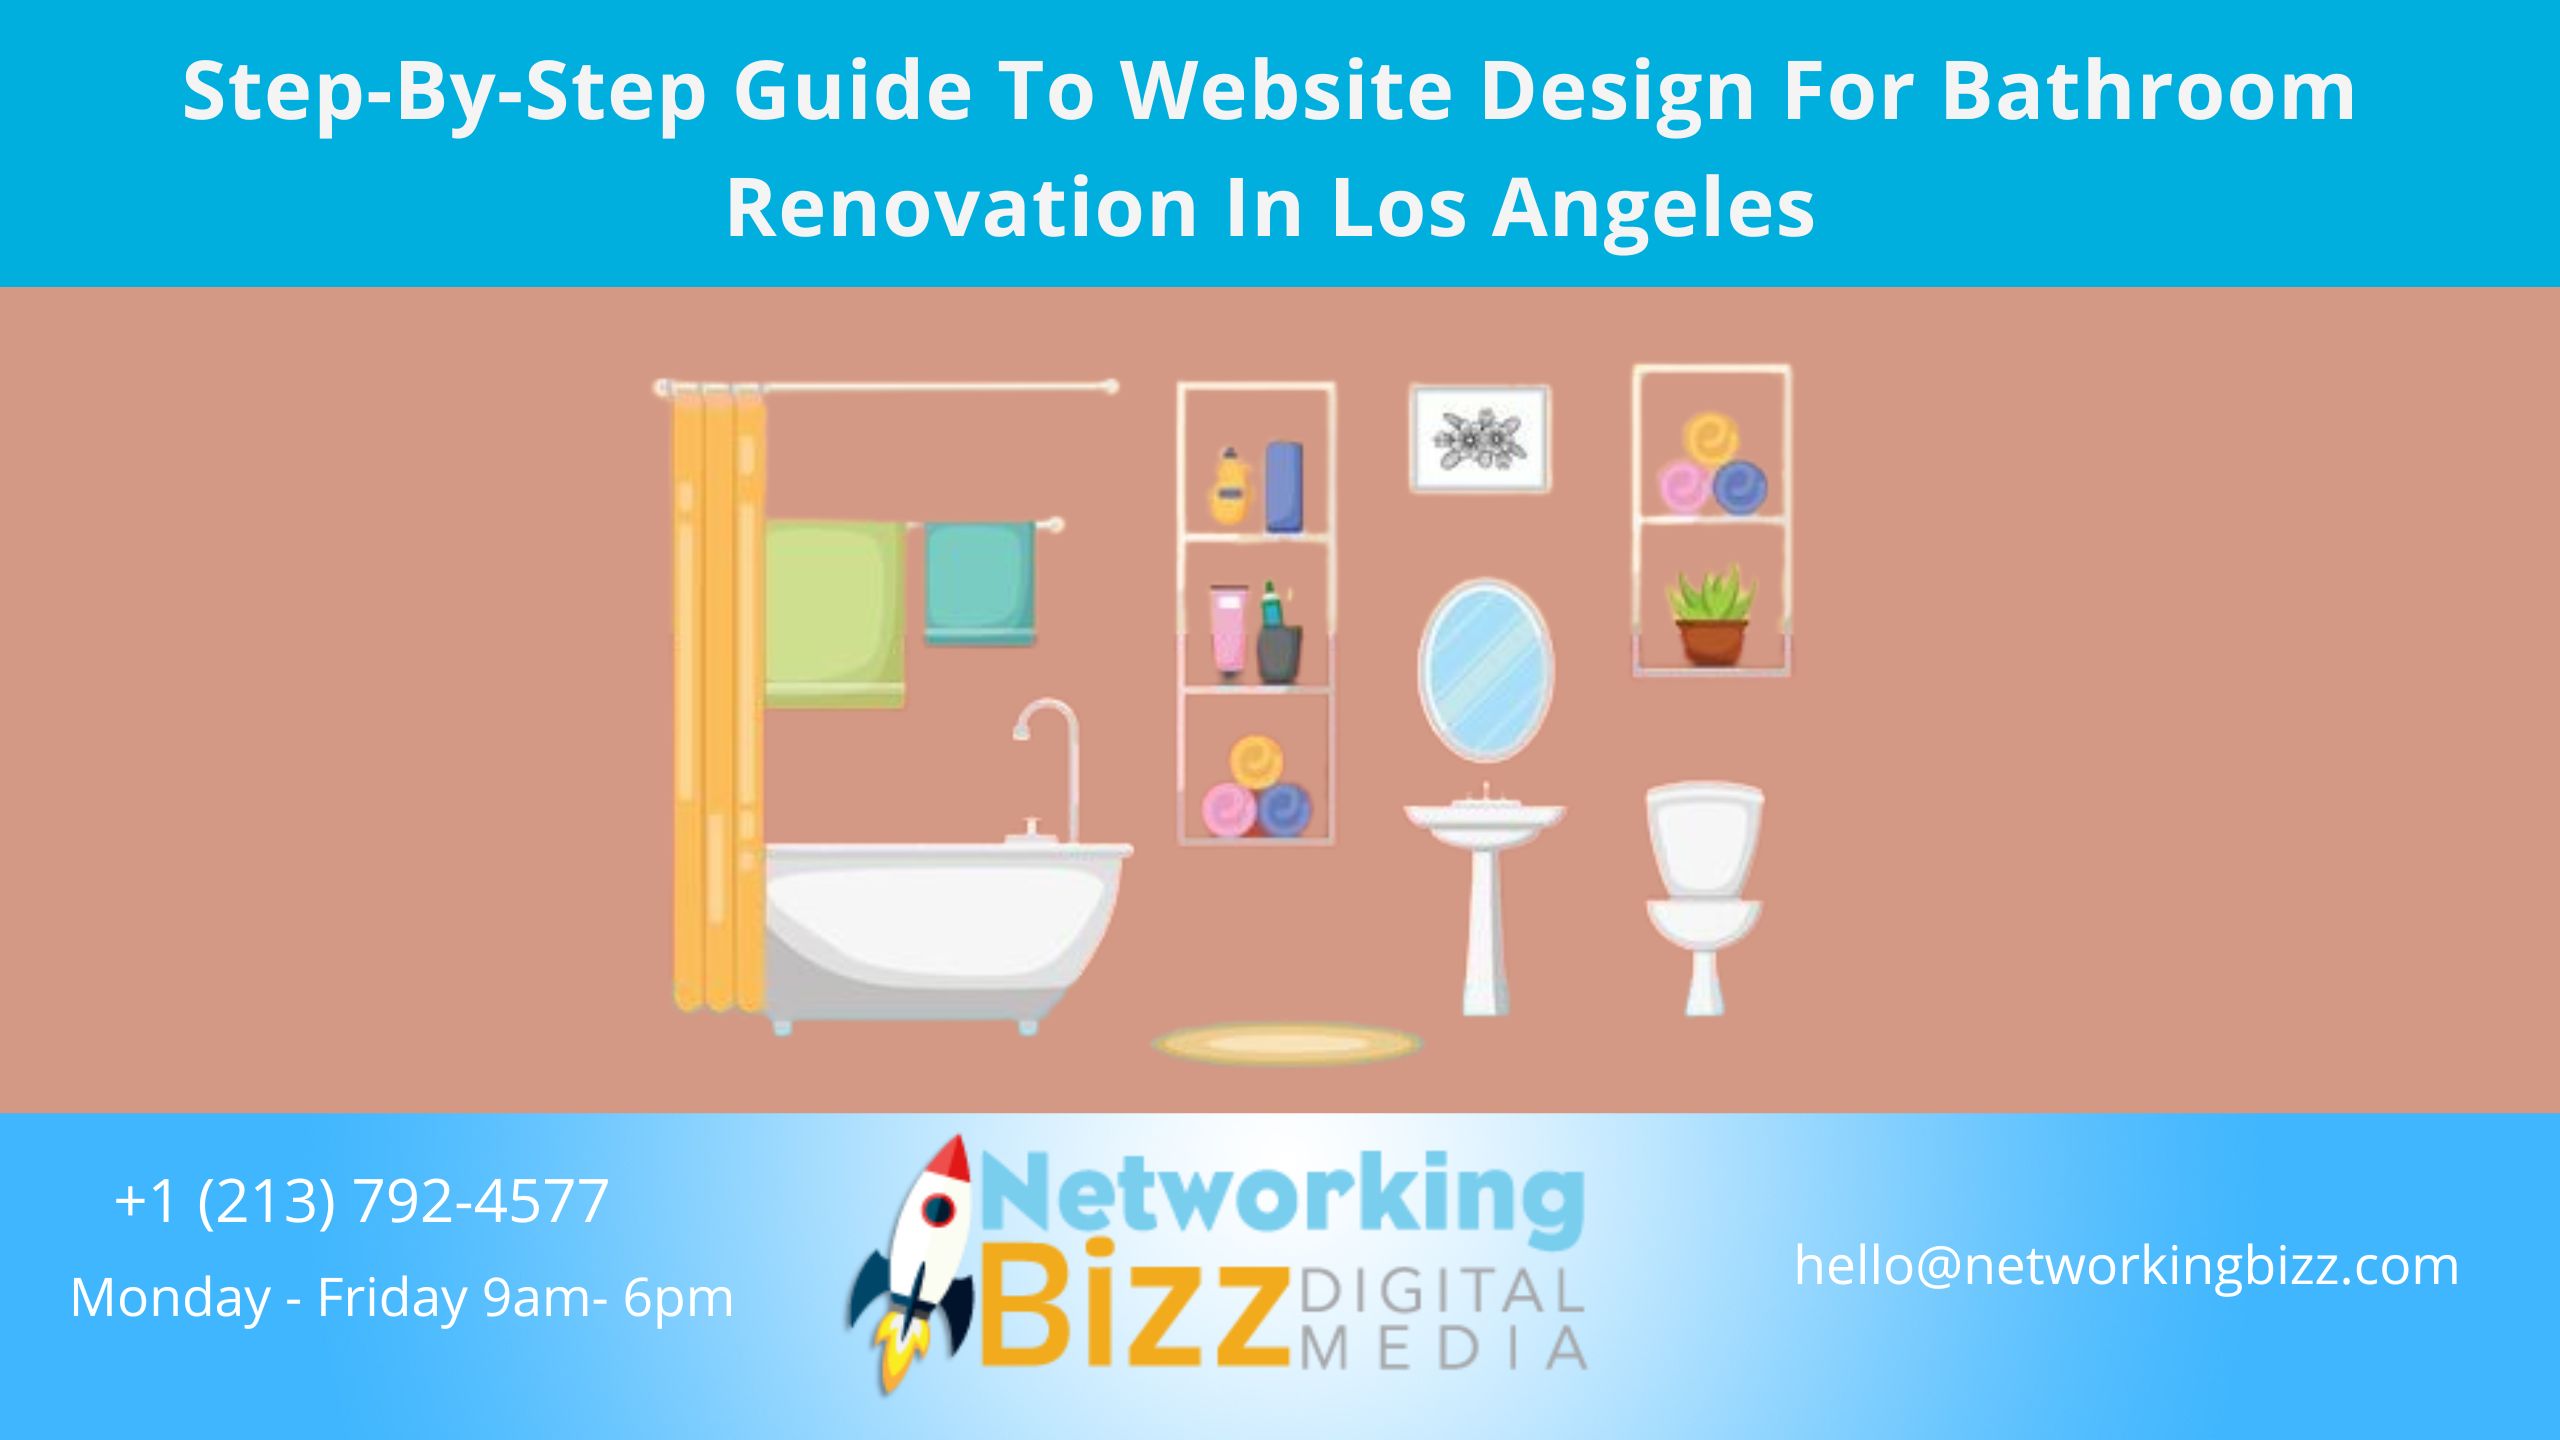 Step-By-Step Guide To Website Design For Bathroom Renovation In Los Angeles